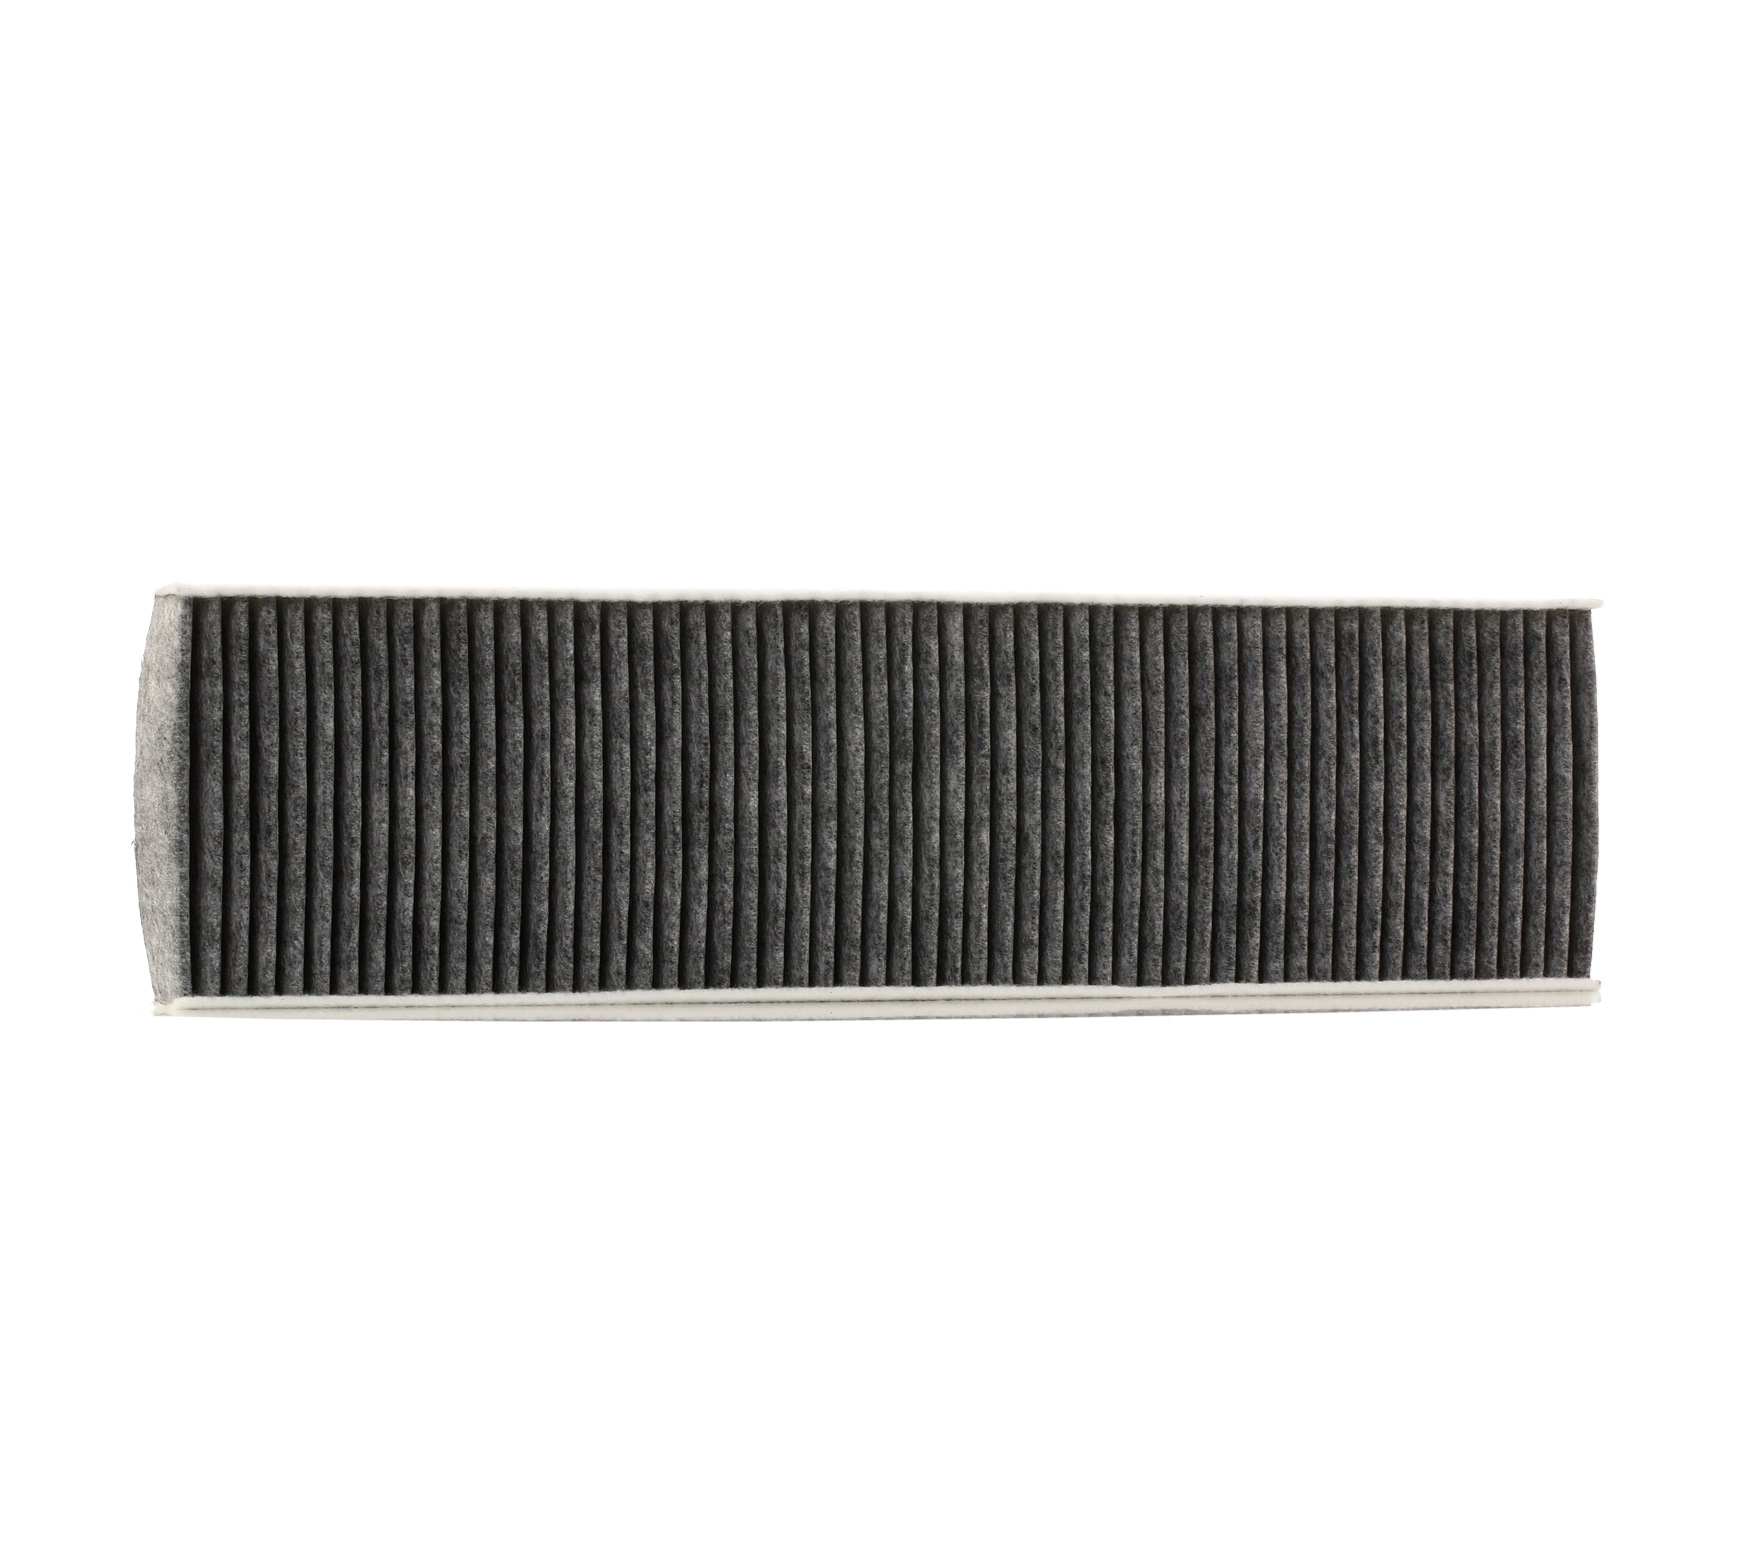 AHC300 PURFLUX Pollen filter MINI Activated Carbon Filter, 450 mm x 119 mm x 32 mm